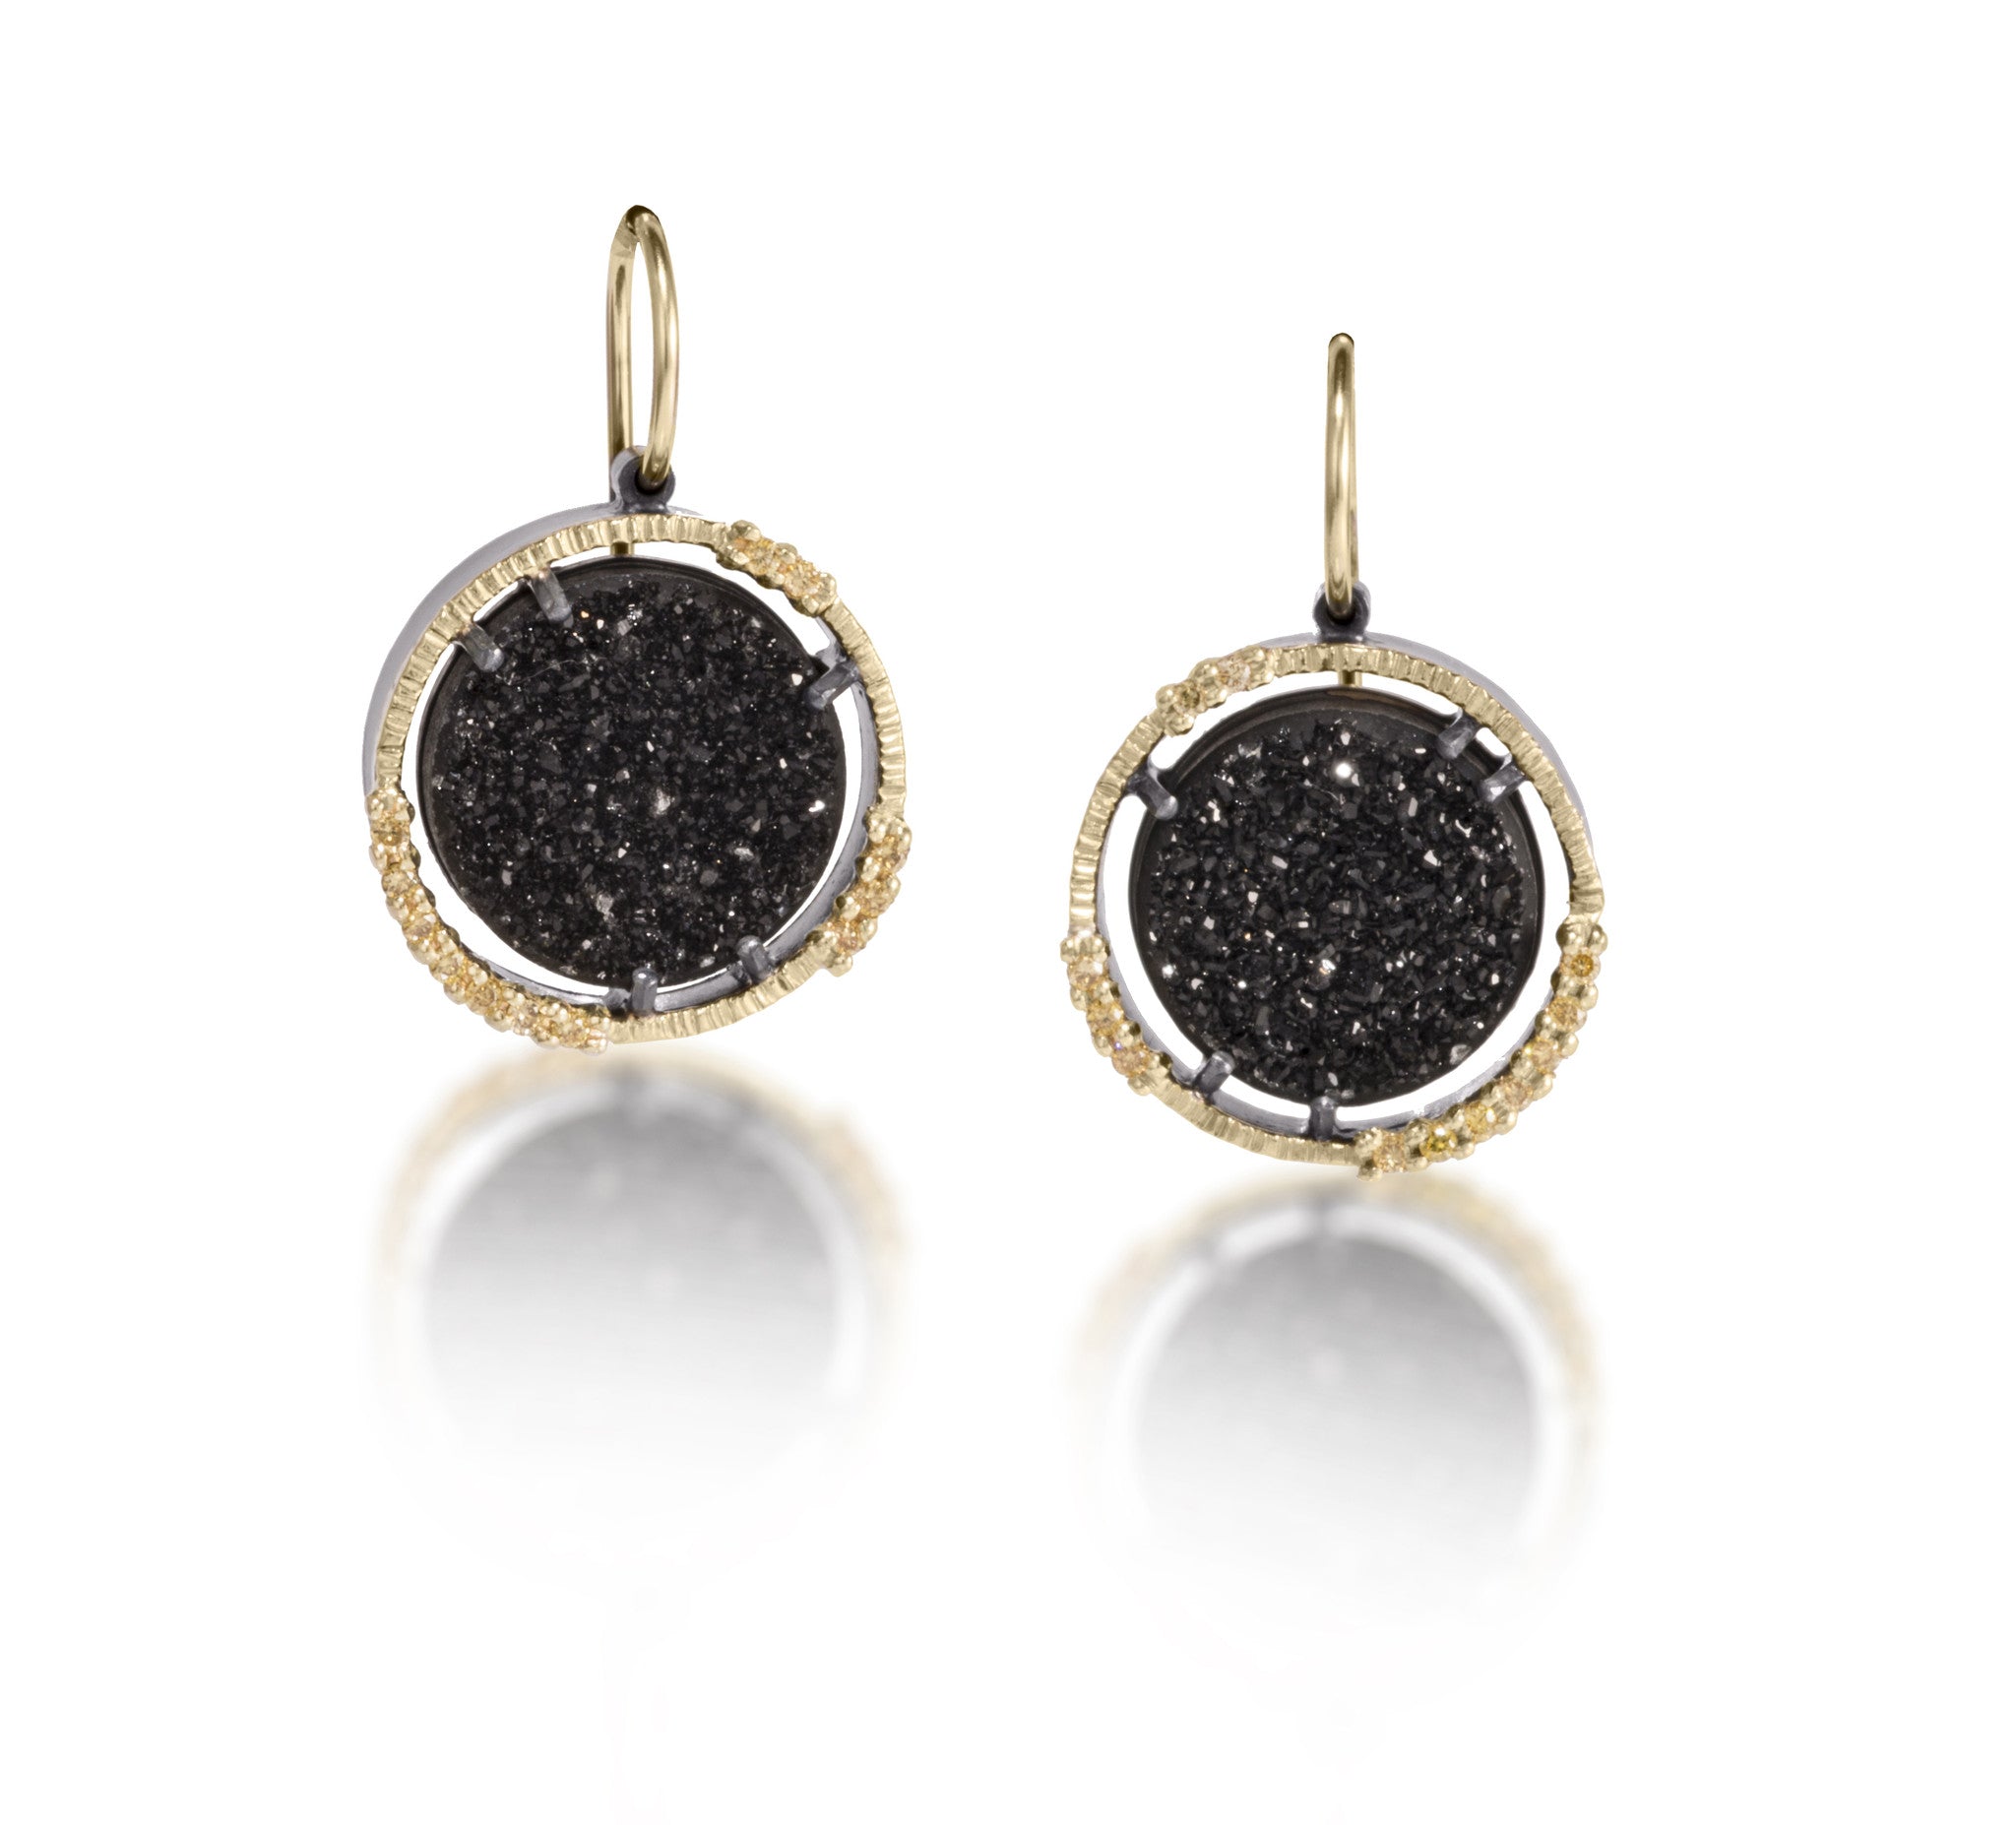 Spiral Earring #4 in 18k gold backed with oxidized sterling silver, prong set black drusy and natural yellow diamonds.  Hand fabricated, hammer textured.  18k earwires, round black drusy.